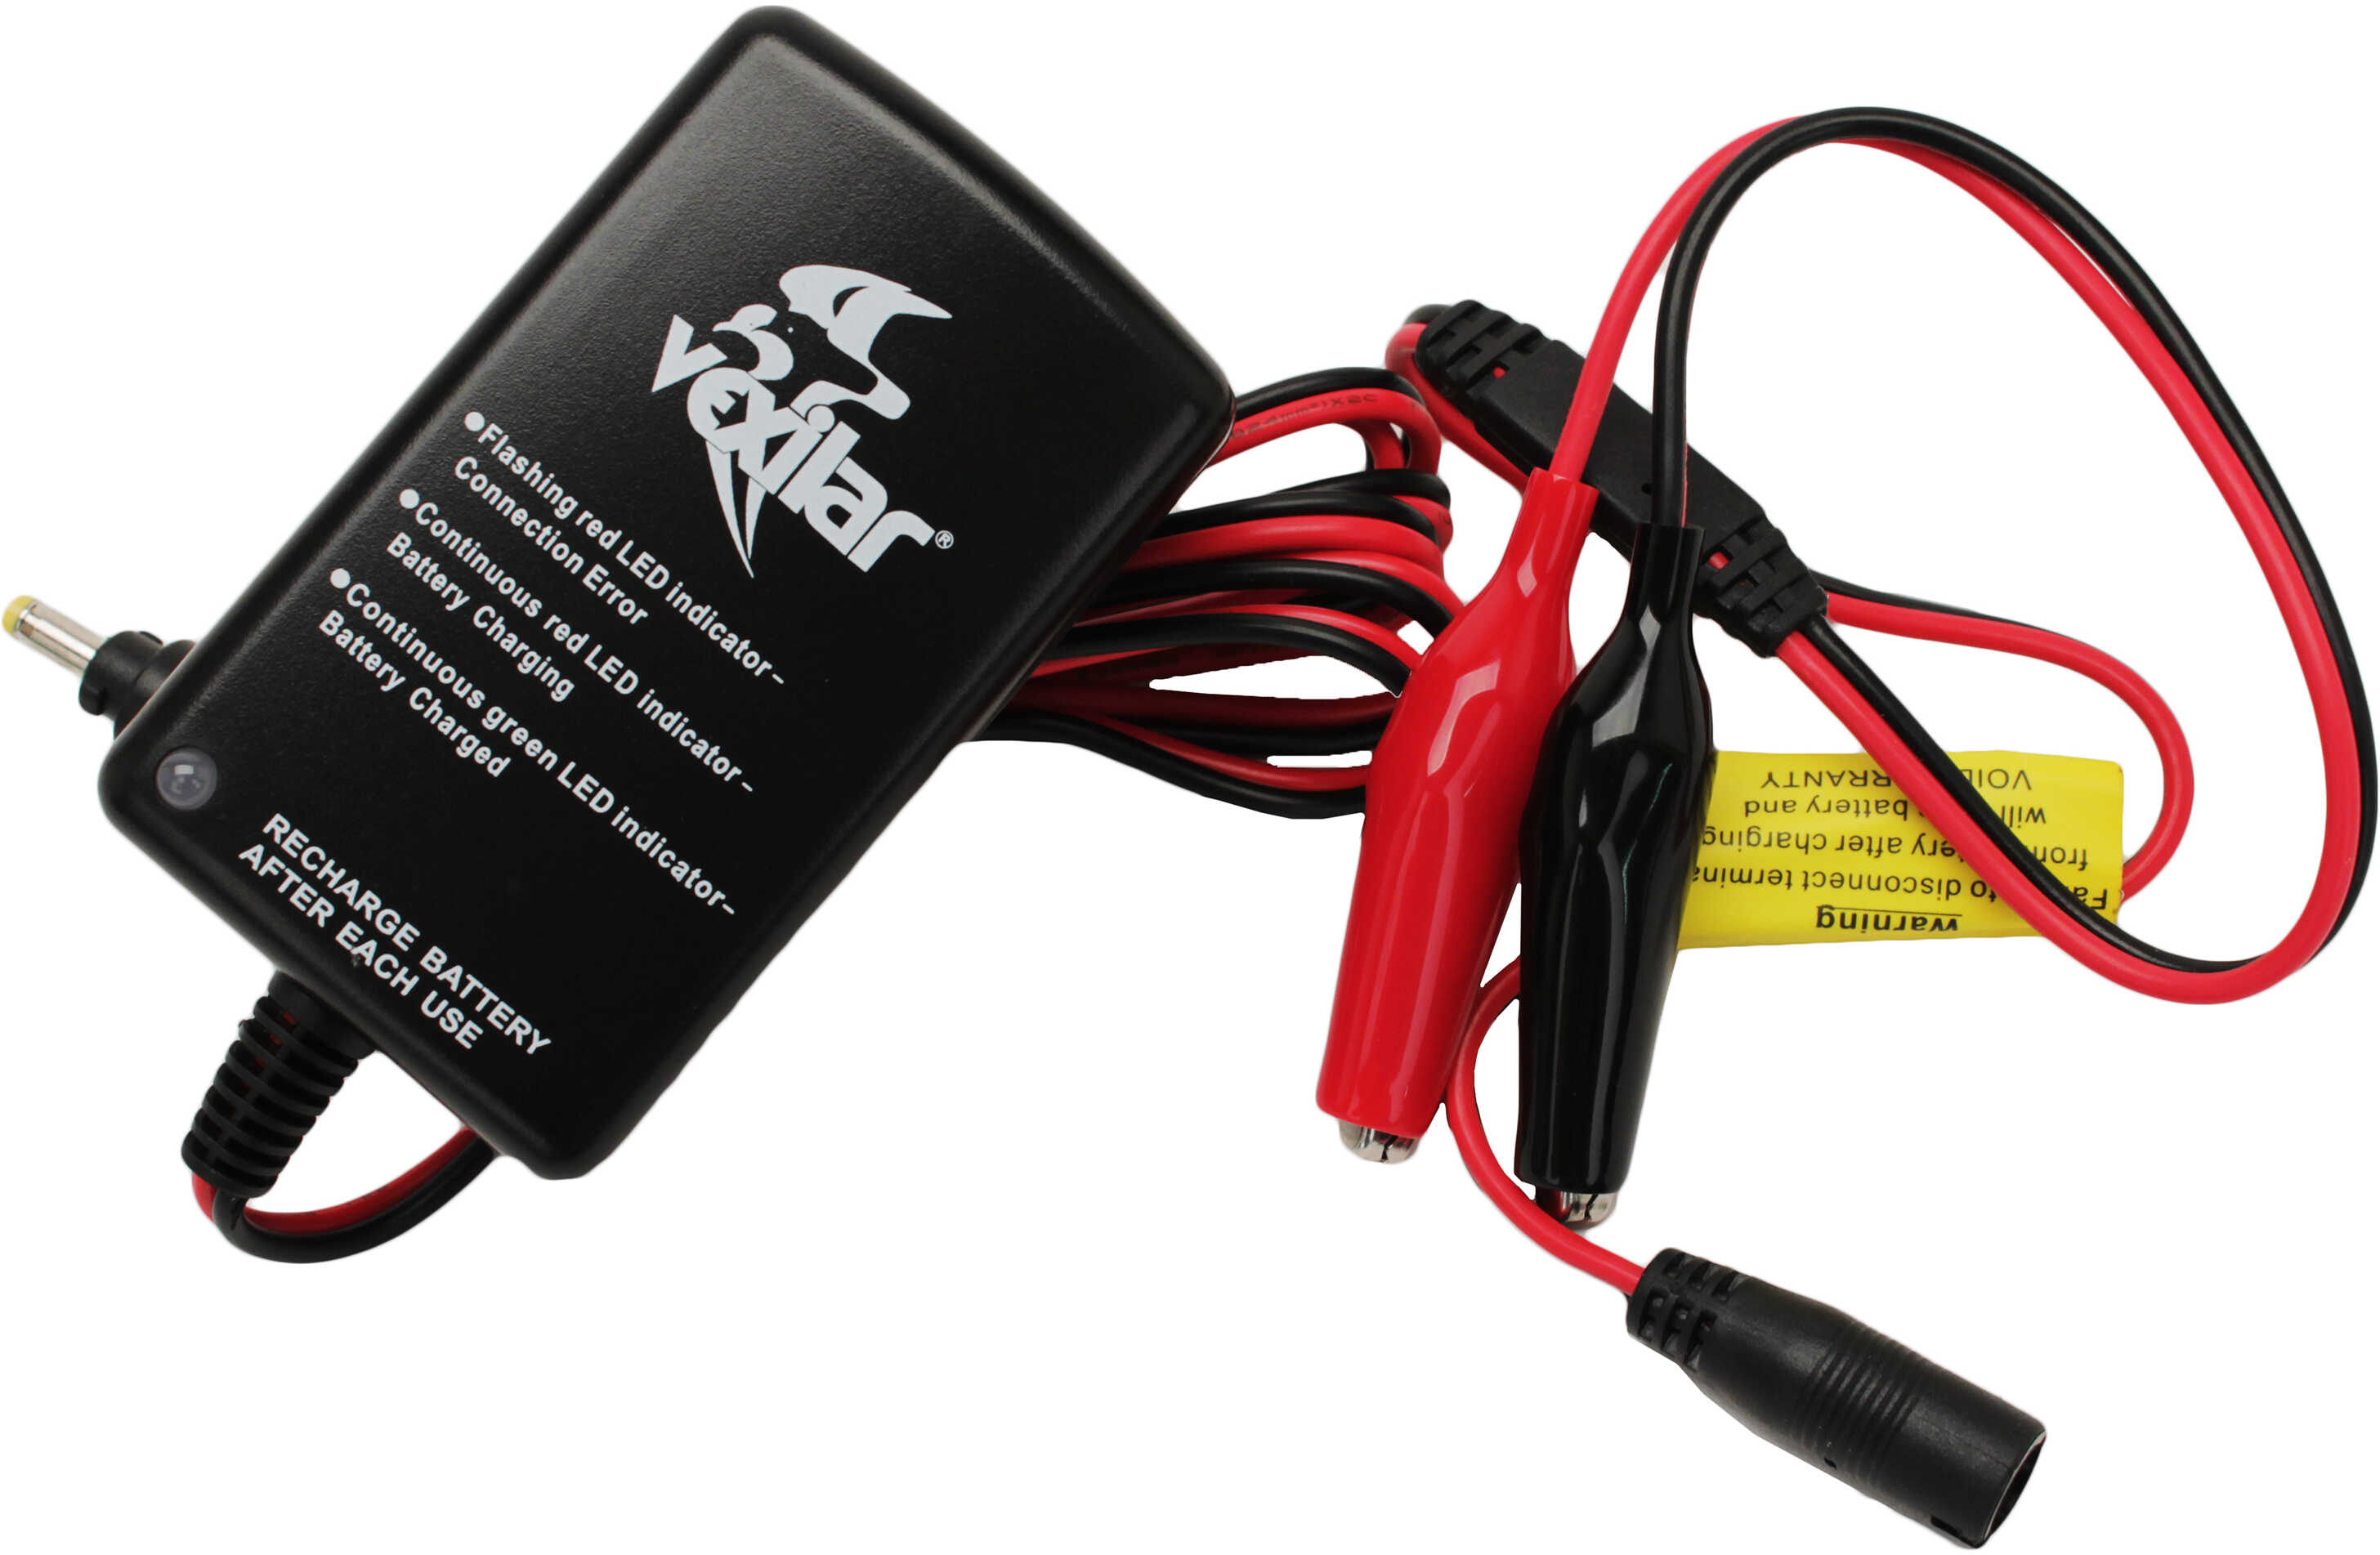 Vexilar Digital Automatic Charger - 1 Amp